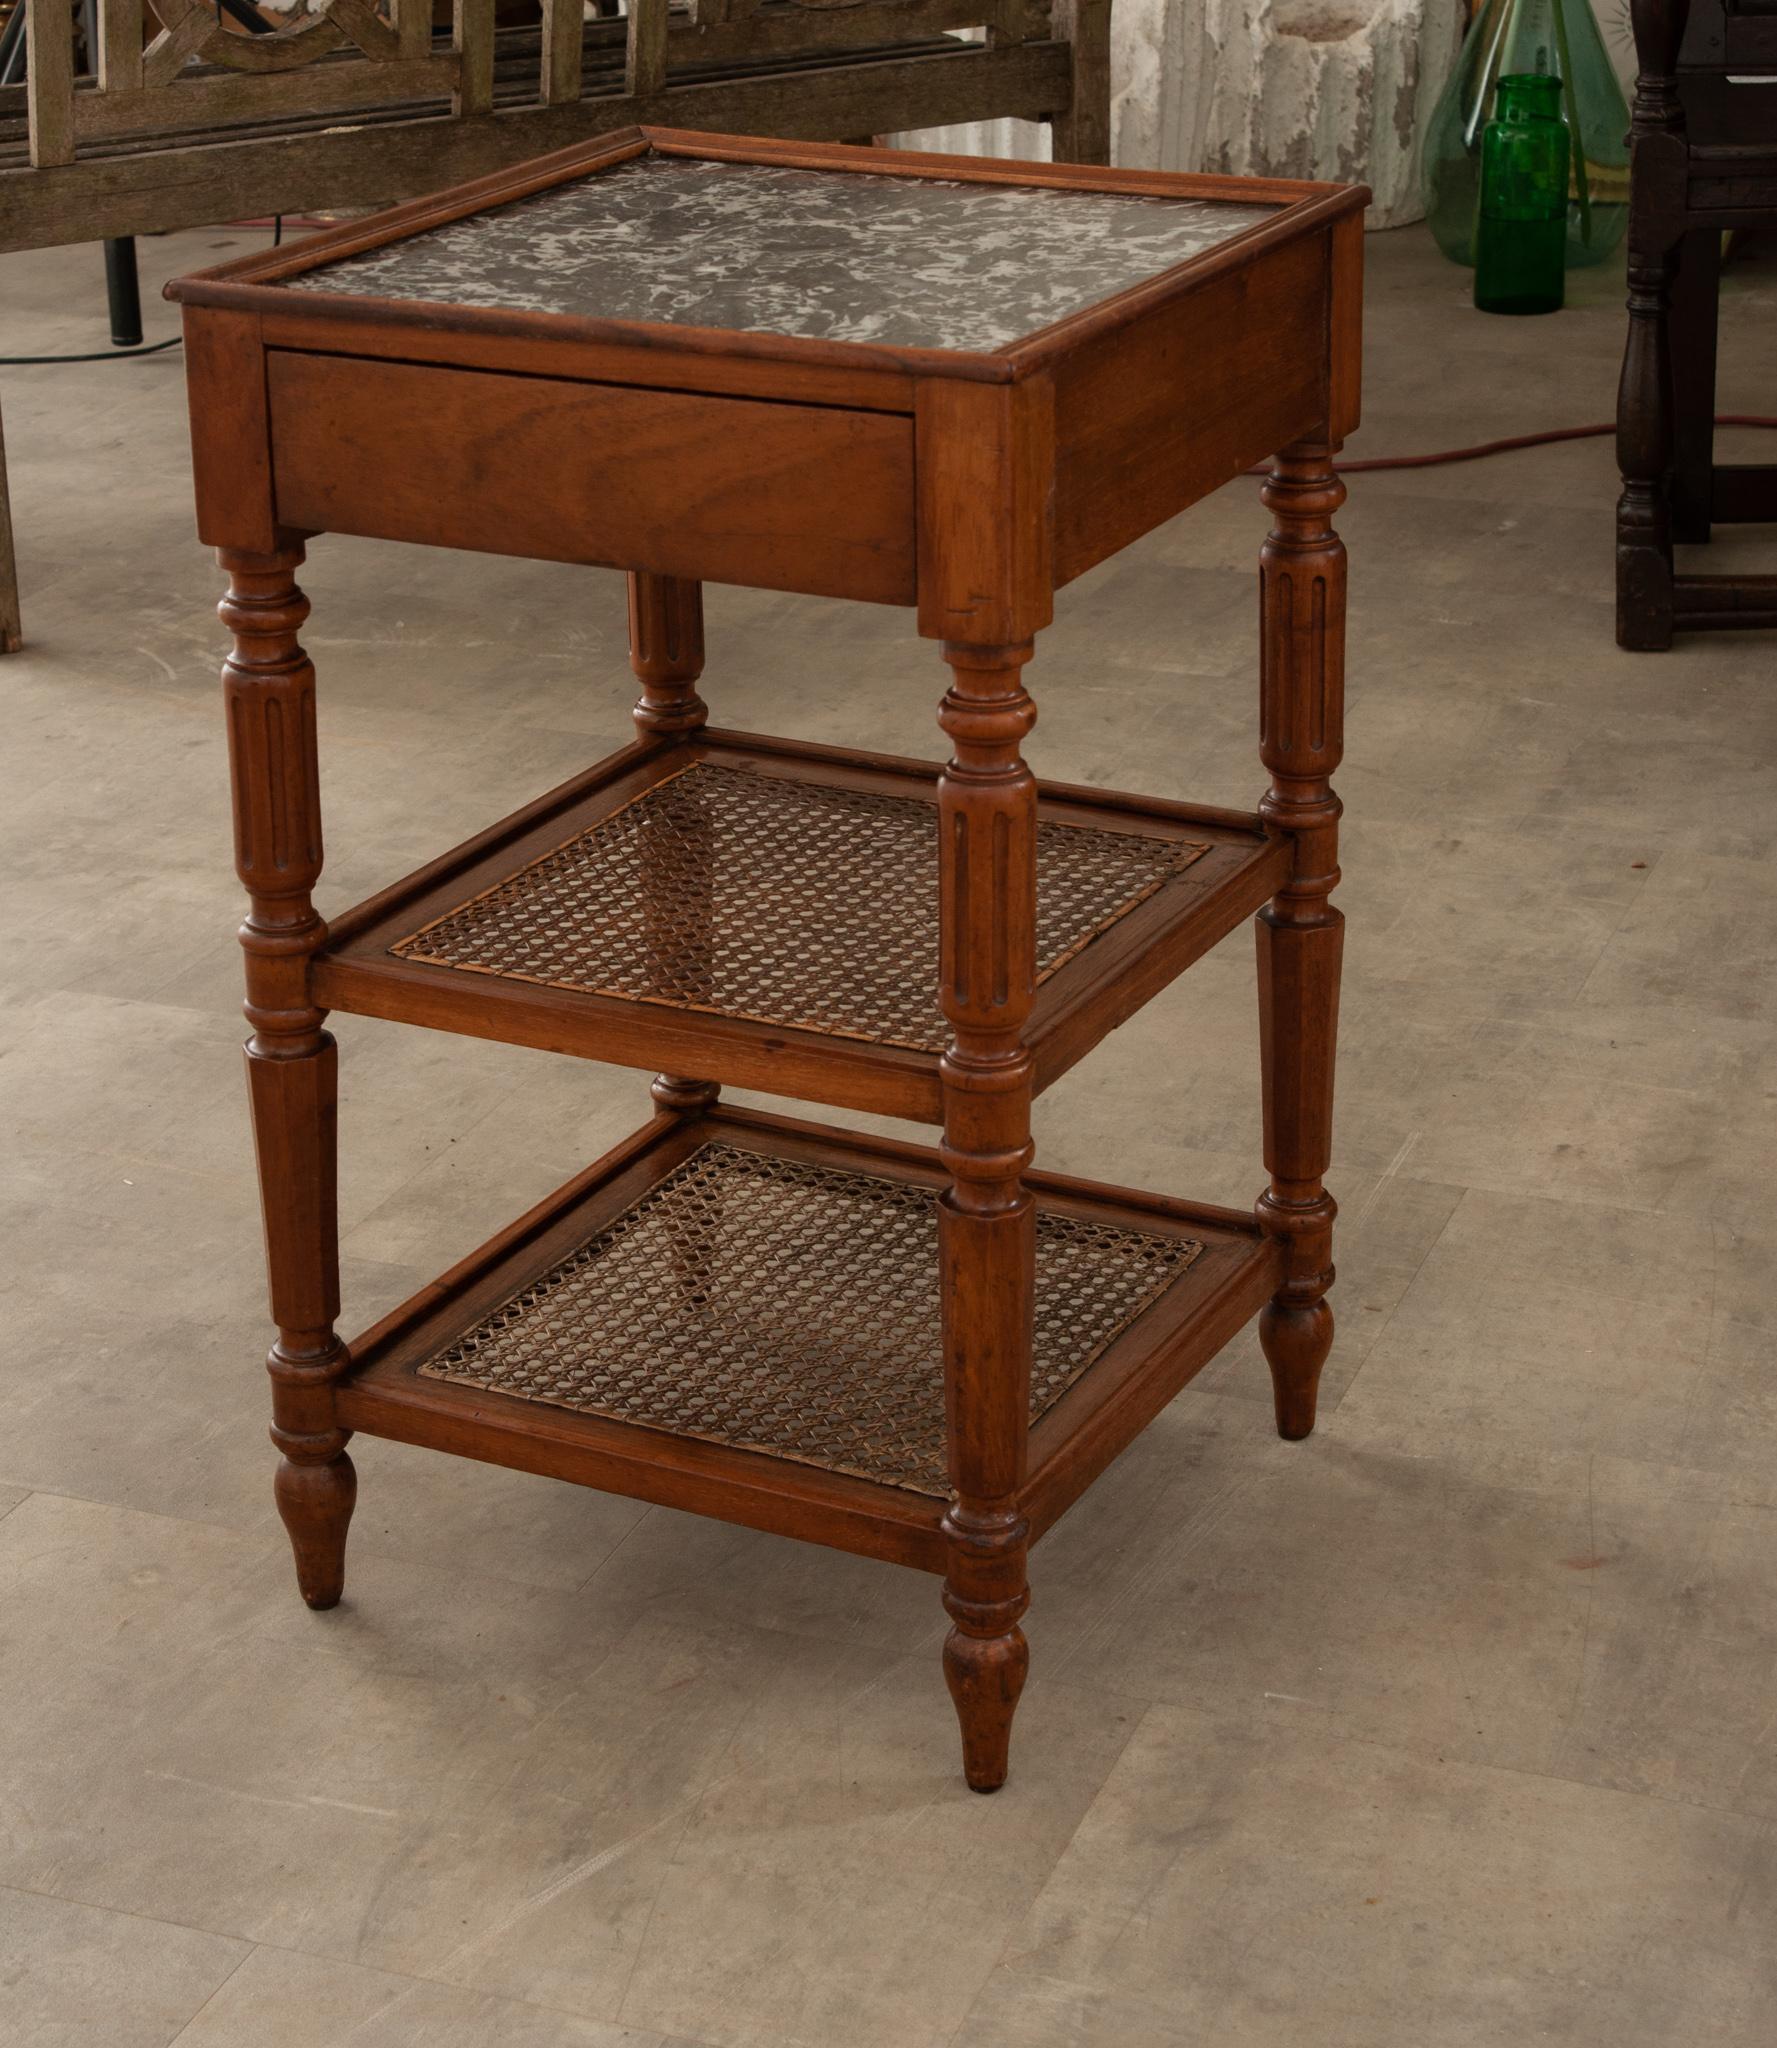 An elegant 19th century English etagere. Hand-crafted in France circa 1870 and built of walnut, the square table stands on finely turned baluster legs ending with arrow feet.  Connected at the base are two cane shelves over a straight plain apron